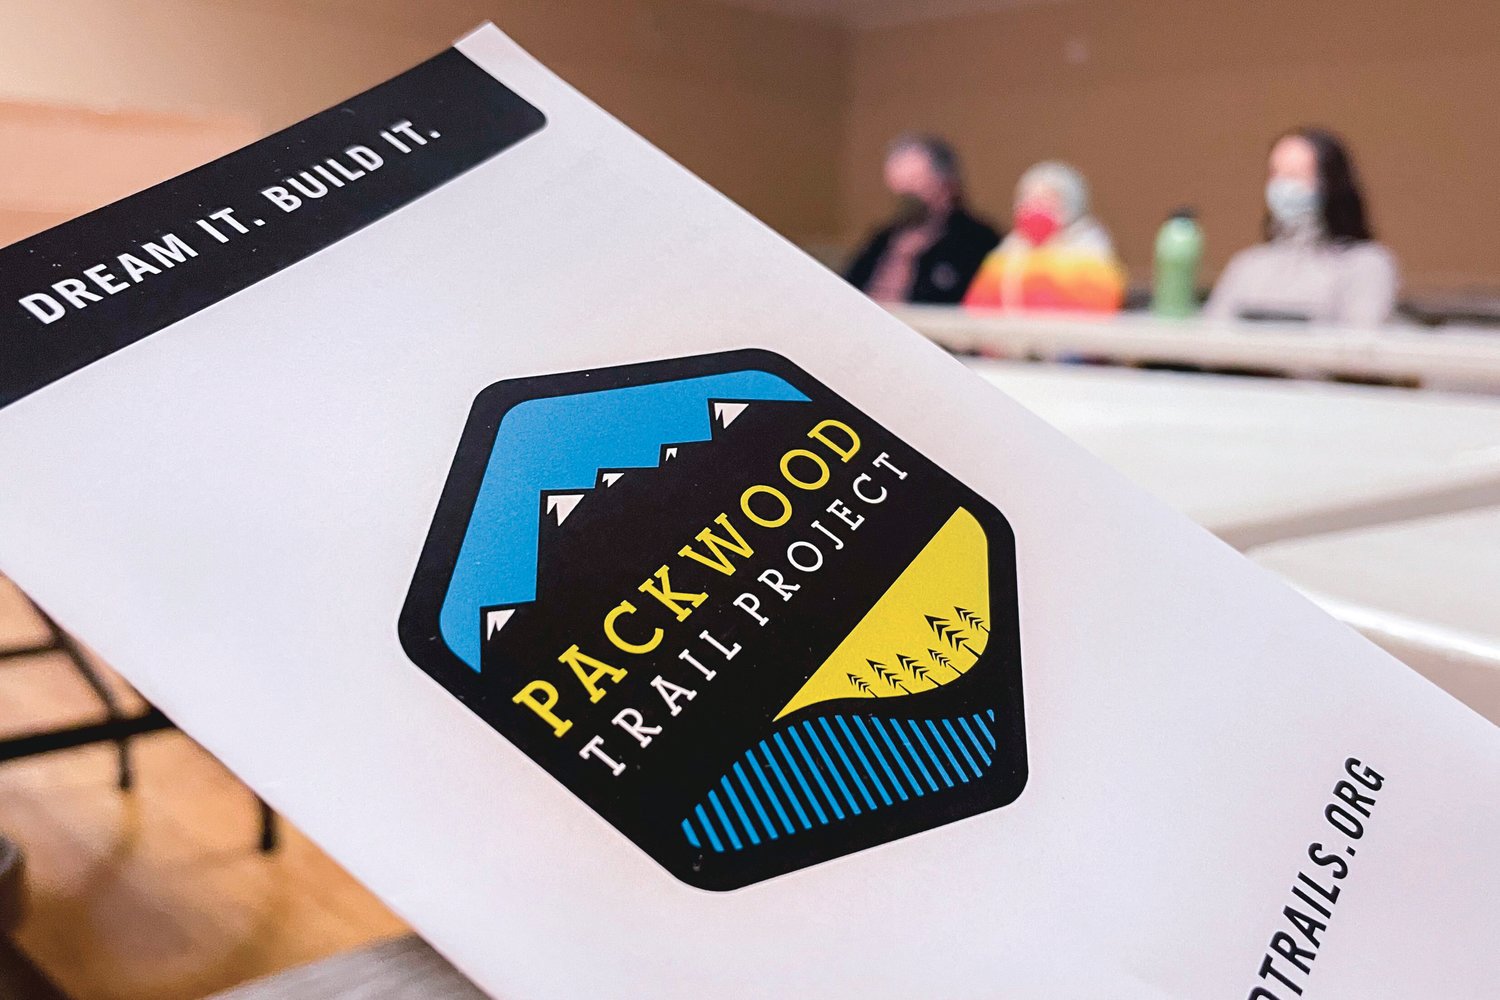 A pamphlet for the Packwood Trail Project is passed around during a public meeting at the Packwood Community Center on Saturday.